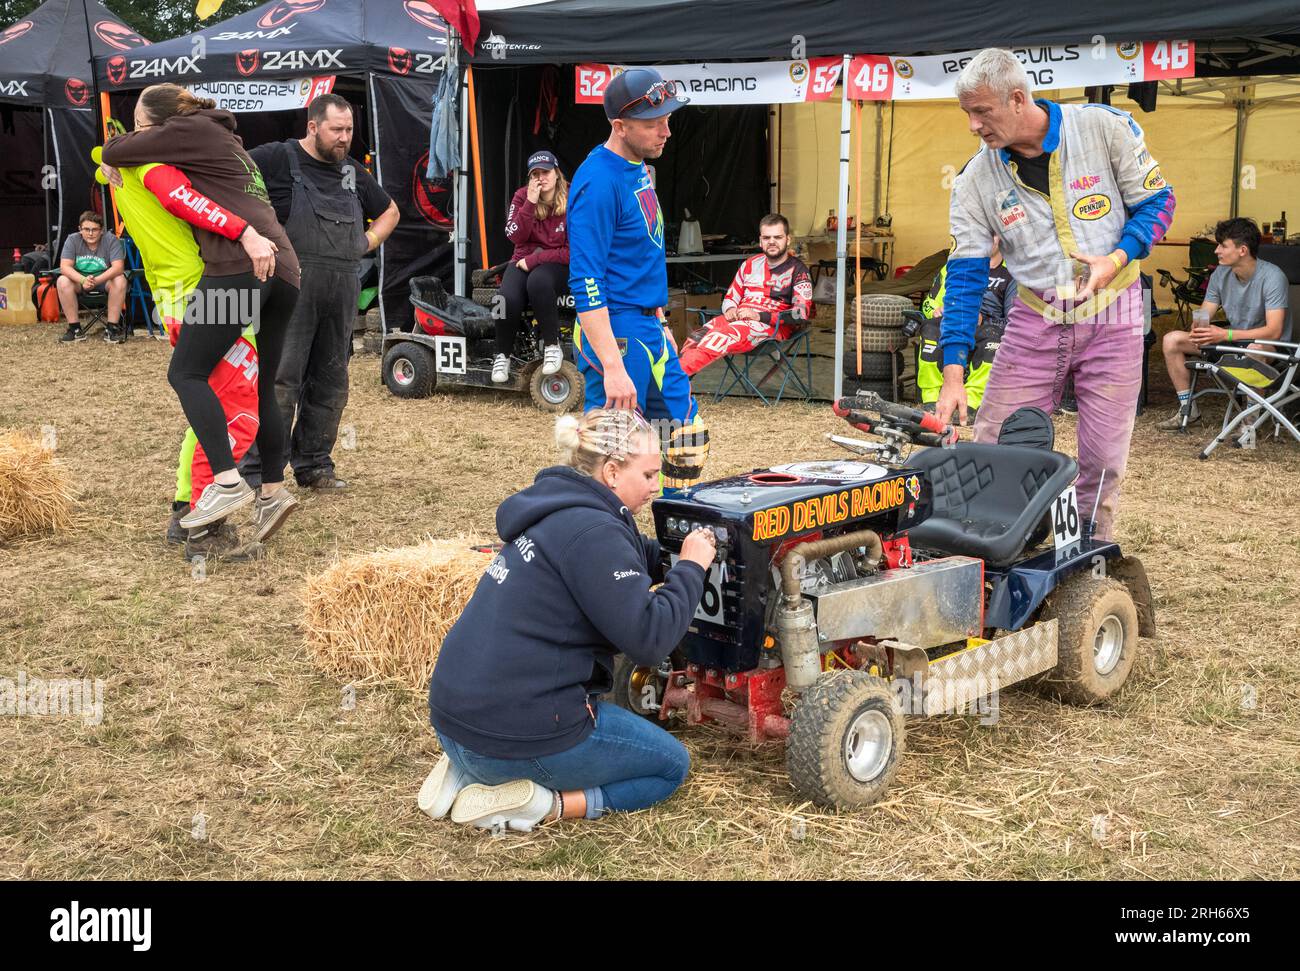 A couple embraces as  members of the 'Red Devils Racing' lawn mower racing team prepare their mower before the annual 14-hour endurance British Lawn M Stock Photo